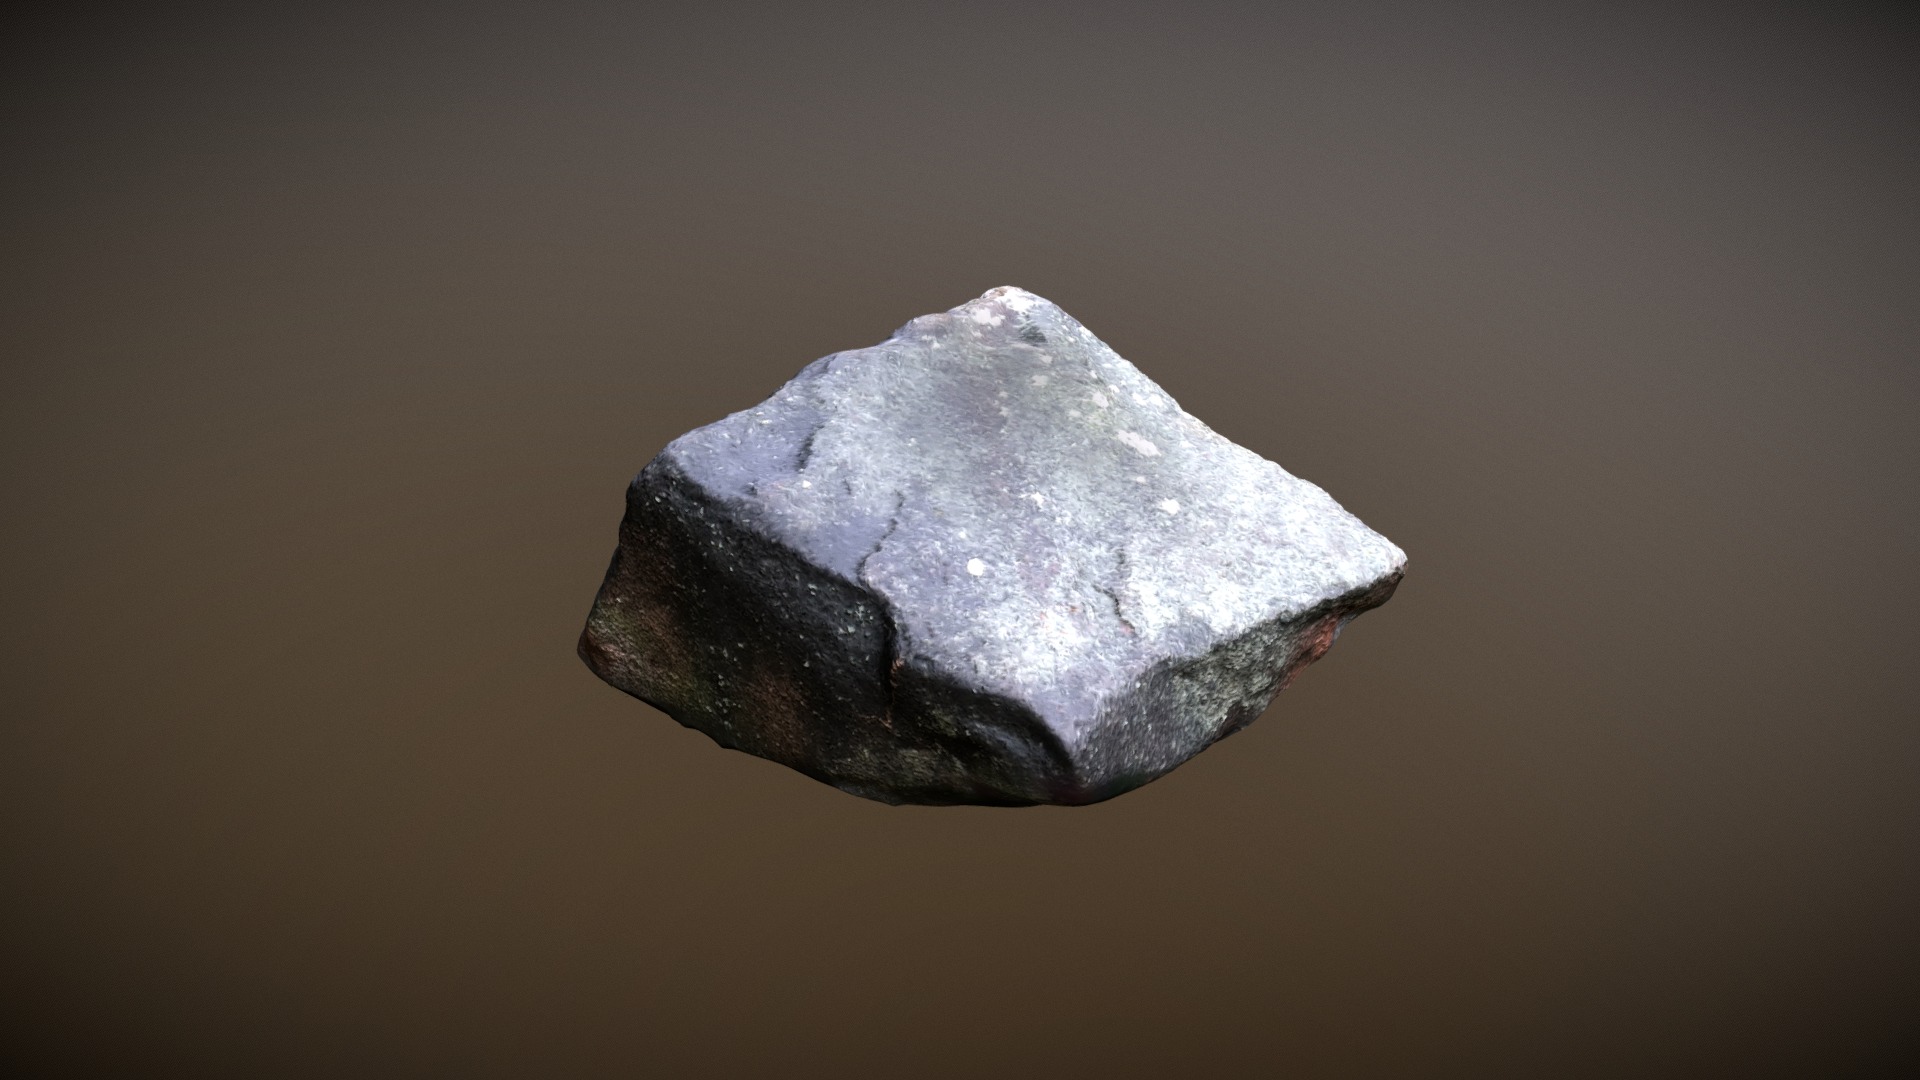 3D model Grey Granite Stone 004, Scanned in Finland - This is a 3D model of the Grey Granite Stone 004, Scanned in Finland. The 3D model is about a rock with a dark gray and white speckled surface.